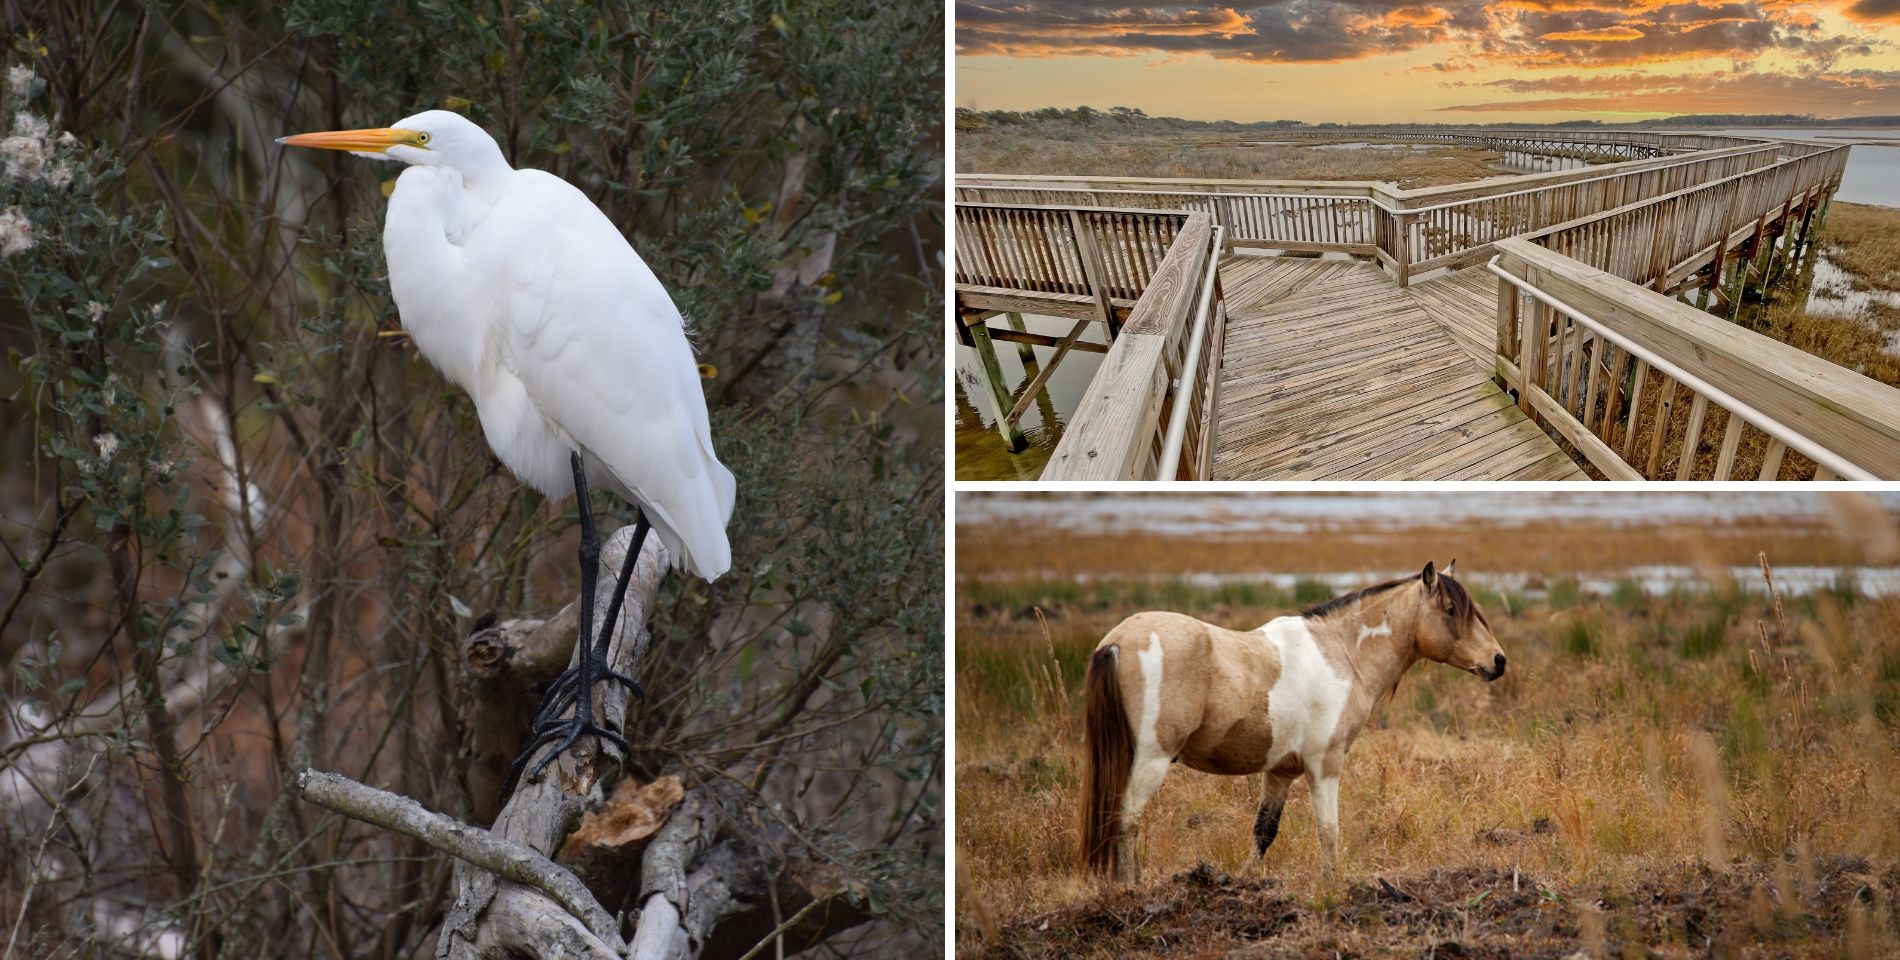 A collage of a boardwalk, horse in grass, and an egret all at Chincoteague National Wildlife Refuge